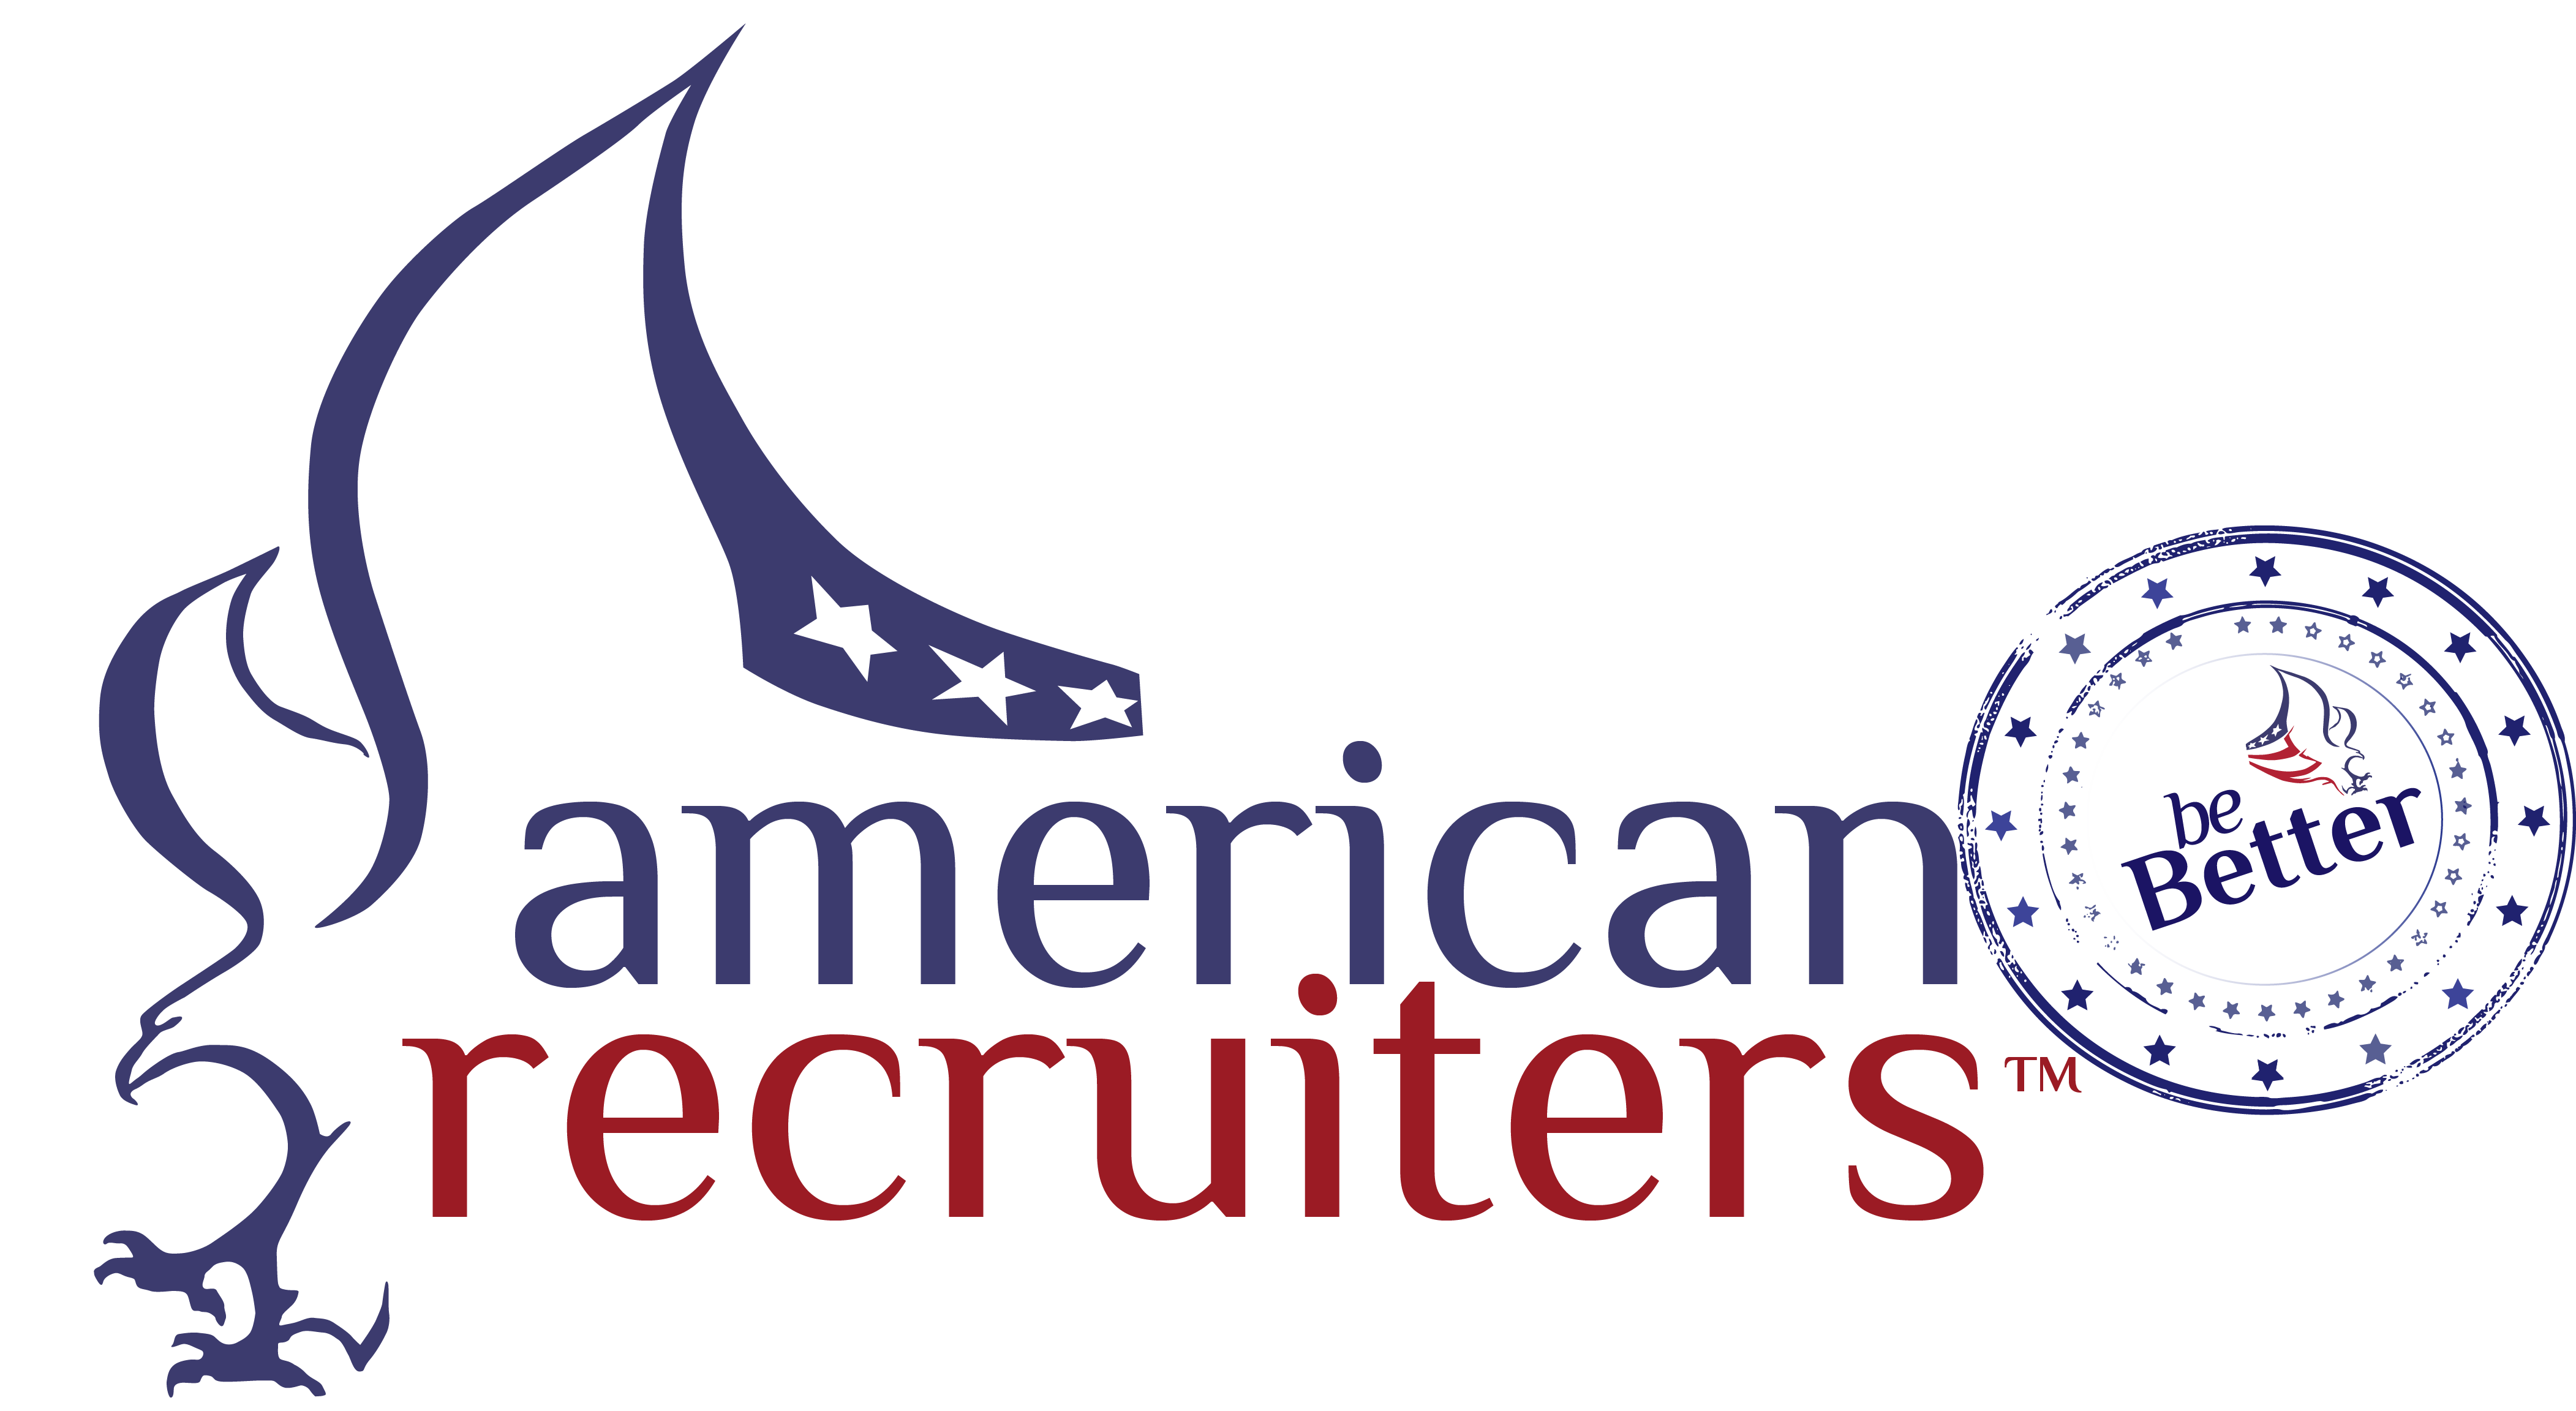 American Recruiters executive staffing and recruiting